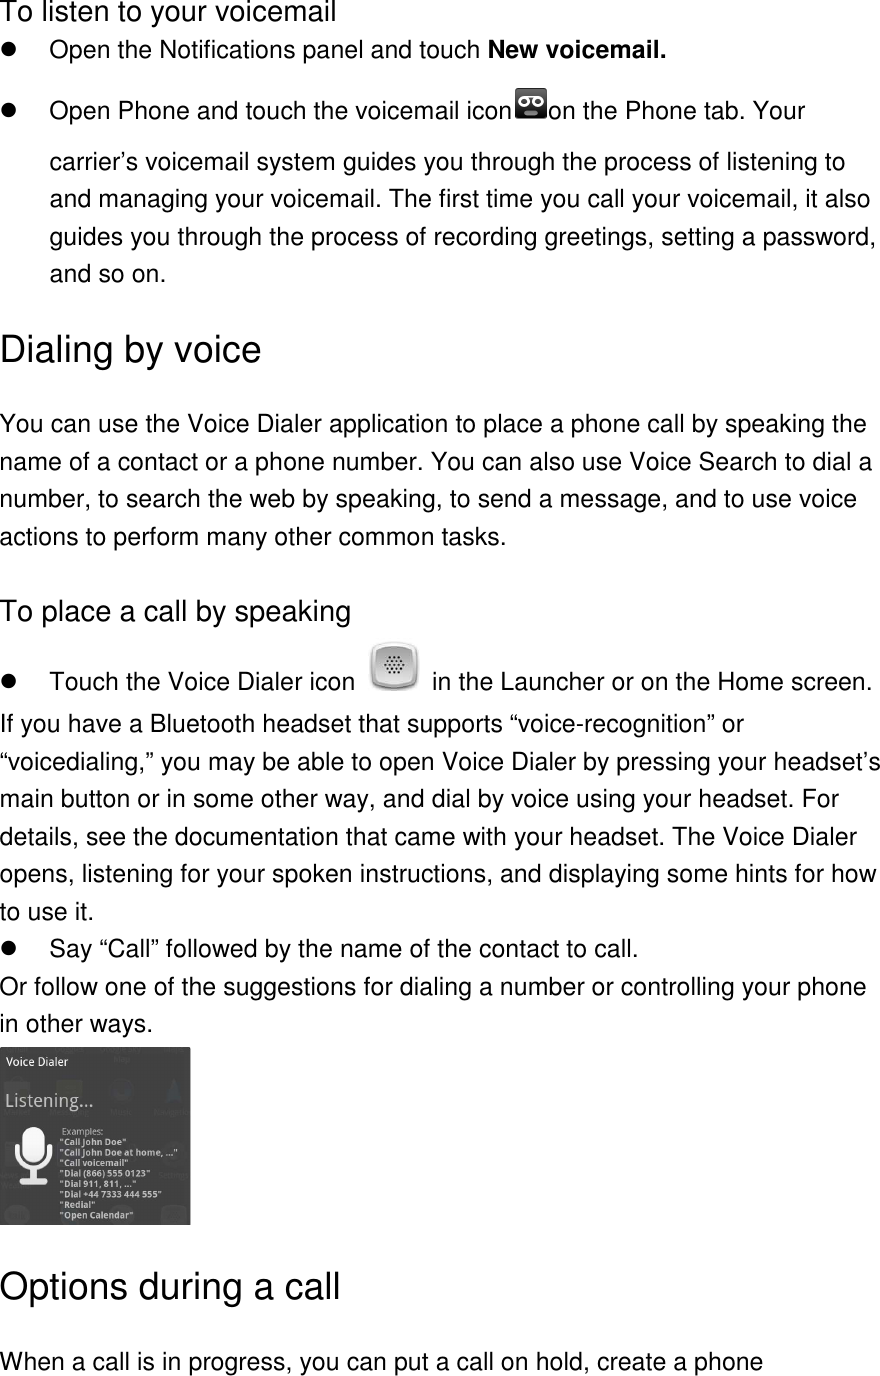  To listen to your voicemail   Open the Notifications panel and touch New voicemail.   Open Phone and touch the voicemail icon on the Phone tab. Your carrier’s voicemail system guides you through the process of listening to and managing your voicemail. The first time you call your voicemail, it also guides you through the process of recording greetings, setting a password, and so on. Dialing by voice You can use the Voice Dialer application to place a phone call by speaking the name of a contact or a phone number. You can also use Voice Search to dial a number, to search the web by speaking, to send a message, and to use voice actions to perform many other common tasks.  To place a call by speaking   Touch the Voice Dialer icon    in the Launcher or on the Home screen. If you have a Bluetooth headset that supports “voice-recognition” or “voicedialing,” you may be able to open Voice Dialer by pressing your headset’s main button or in some other way, and dial by voice using your headset. For details, see the documentation that came with your headset. The Voice Dialer opens, listening for your spoken instructions, and displaying some hints for how to use it.   Say “Call” followed by the name of the contact to call. Or follow one of the suggestions for dialing a number or controlling your phone in other ways.  Options during a call When a call is in progress, you can put a call on hold, create a phone 